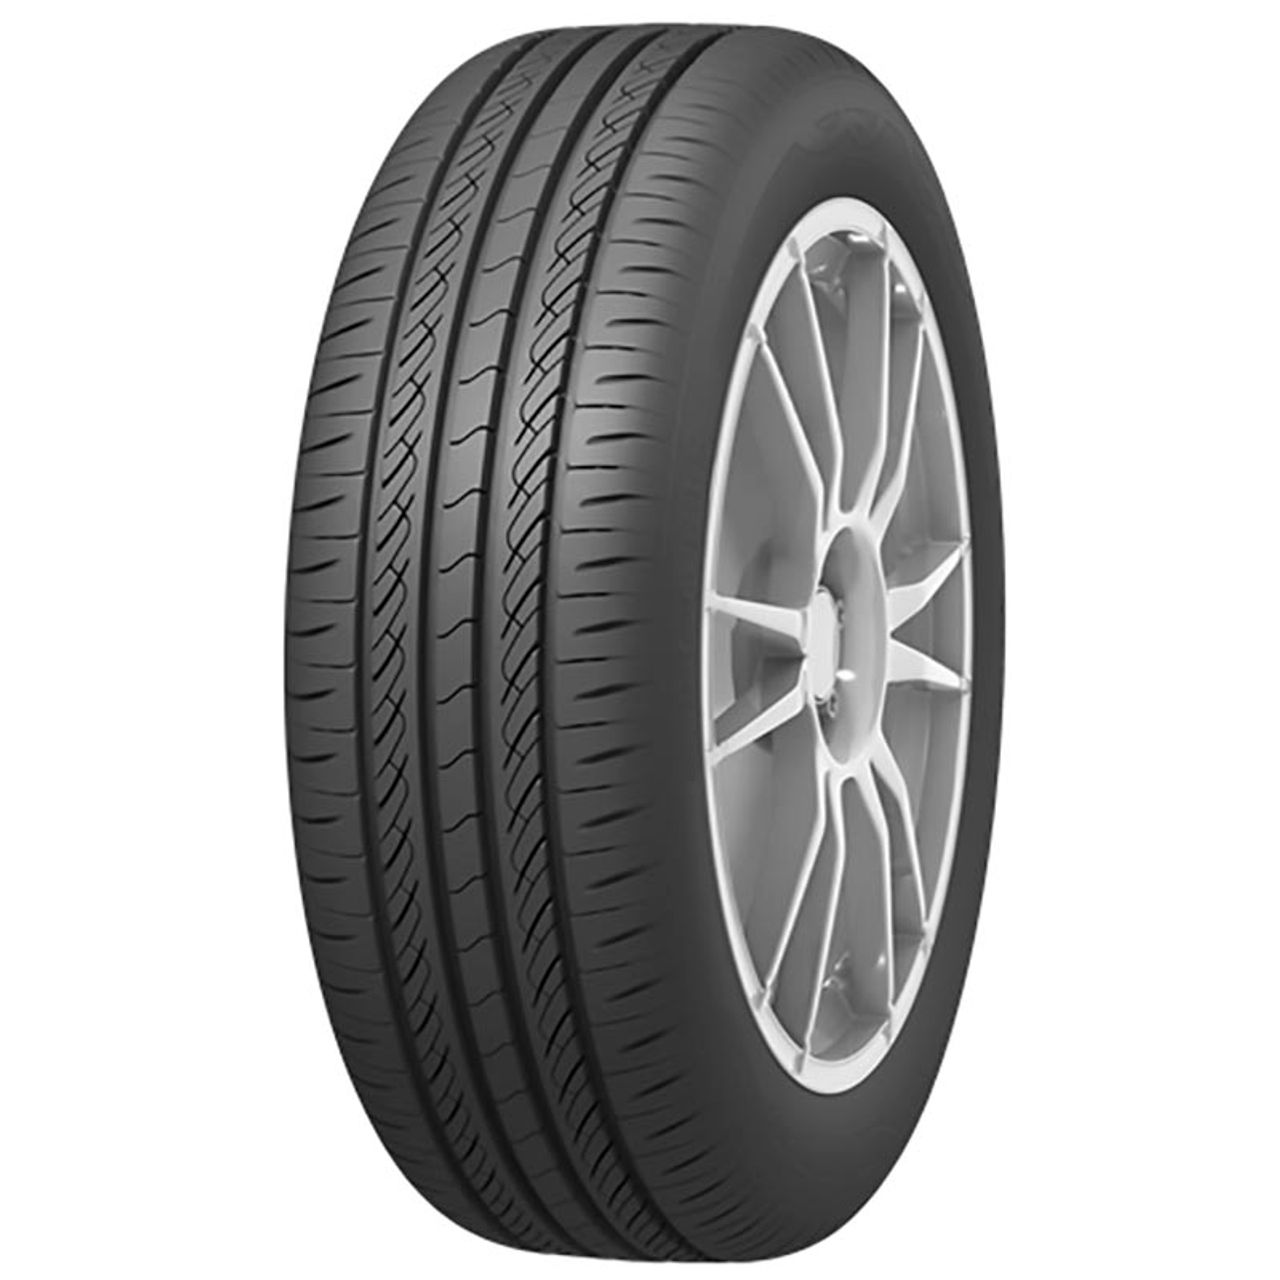 INFINITY ECOSIS 215/60R16 99H BSW XL